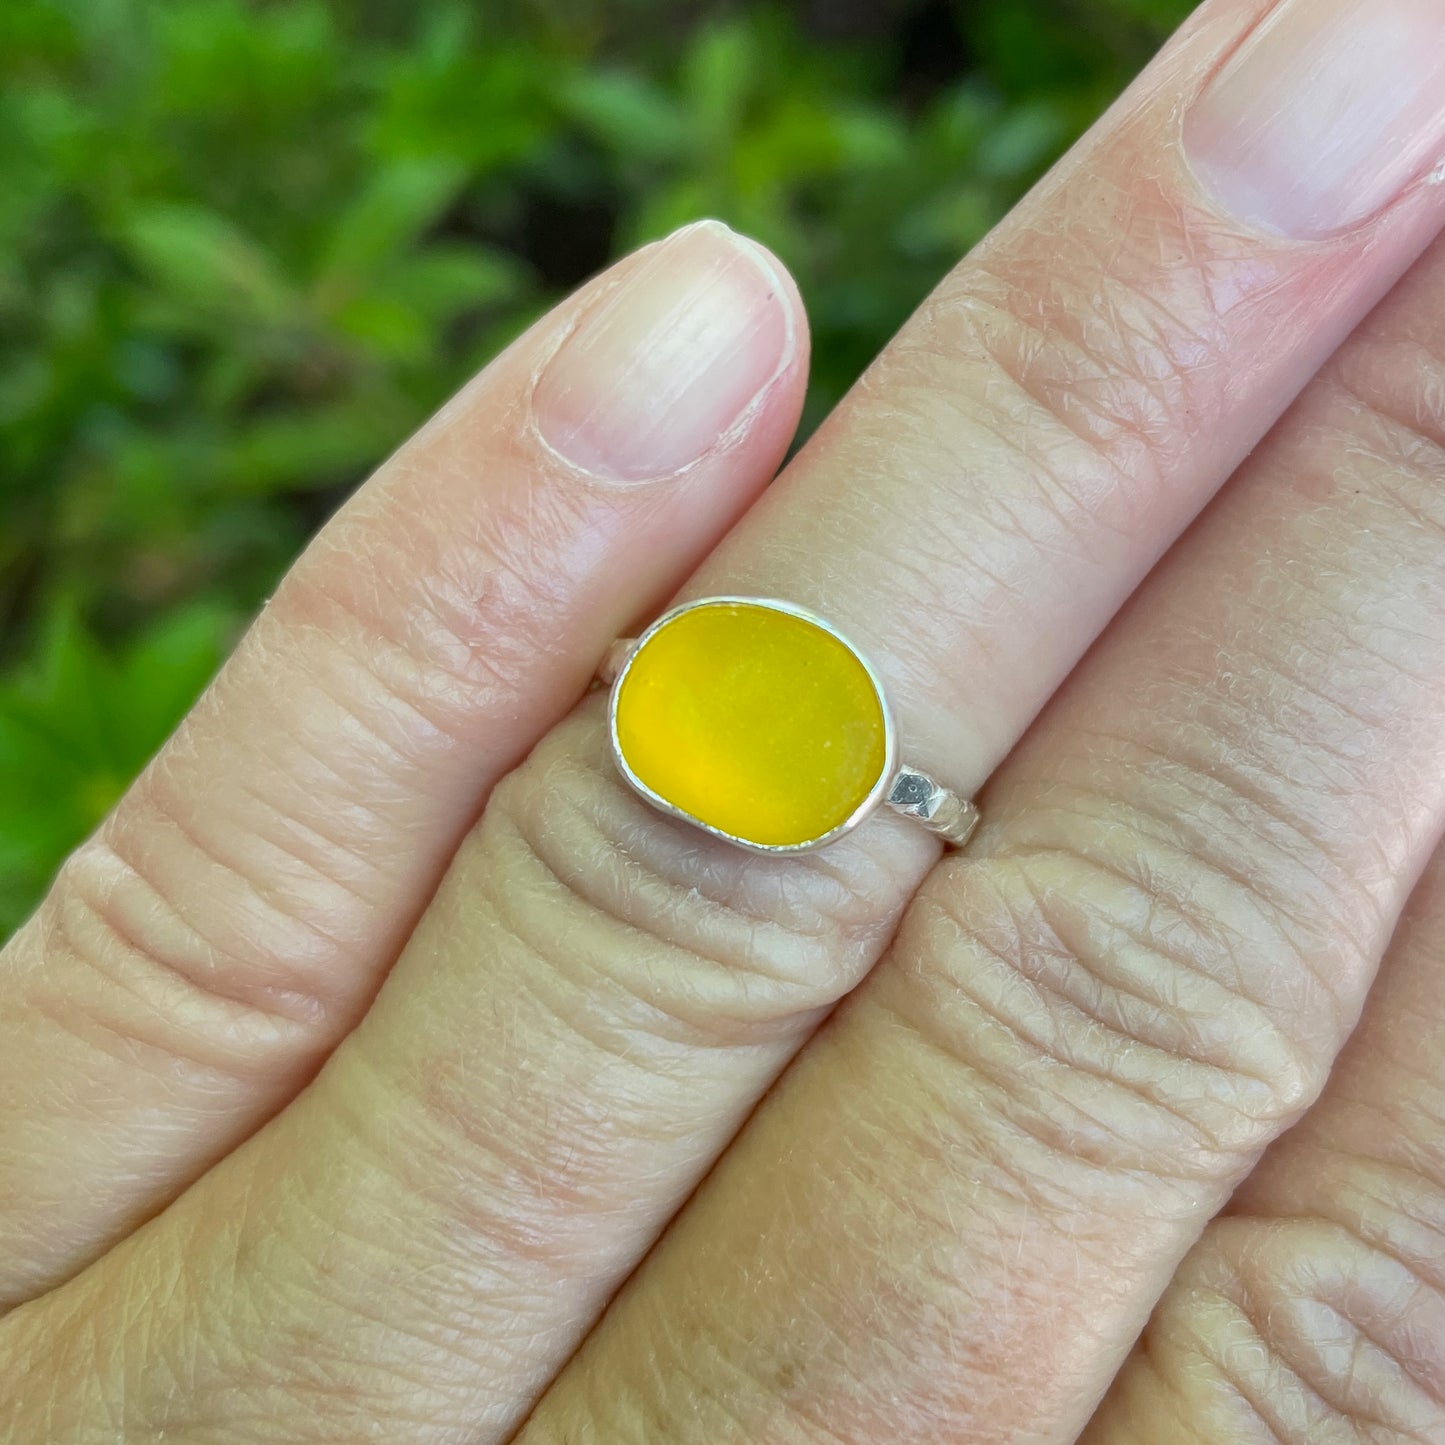 This is a rare piece of golden yellow sea glass set in a fine and sterling silver bezel setting on a twisted wire band.  Size 5 3/4 modeled on hand